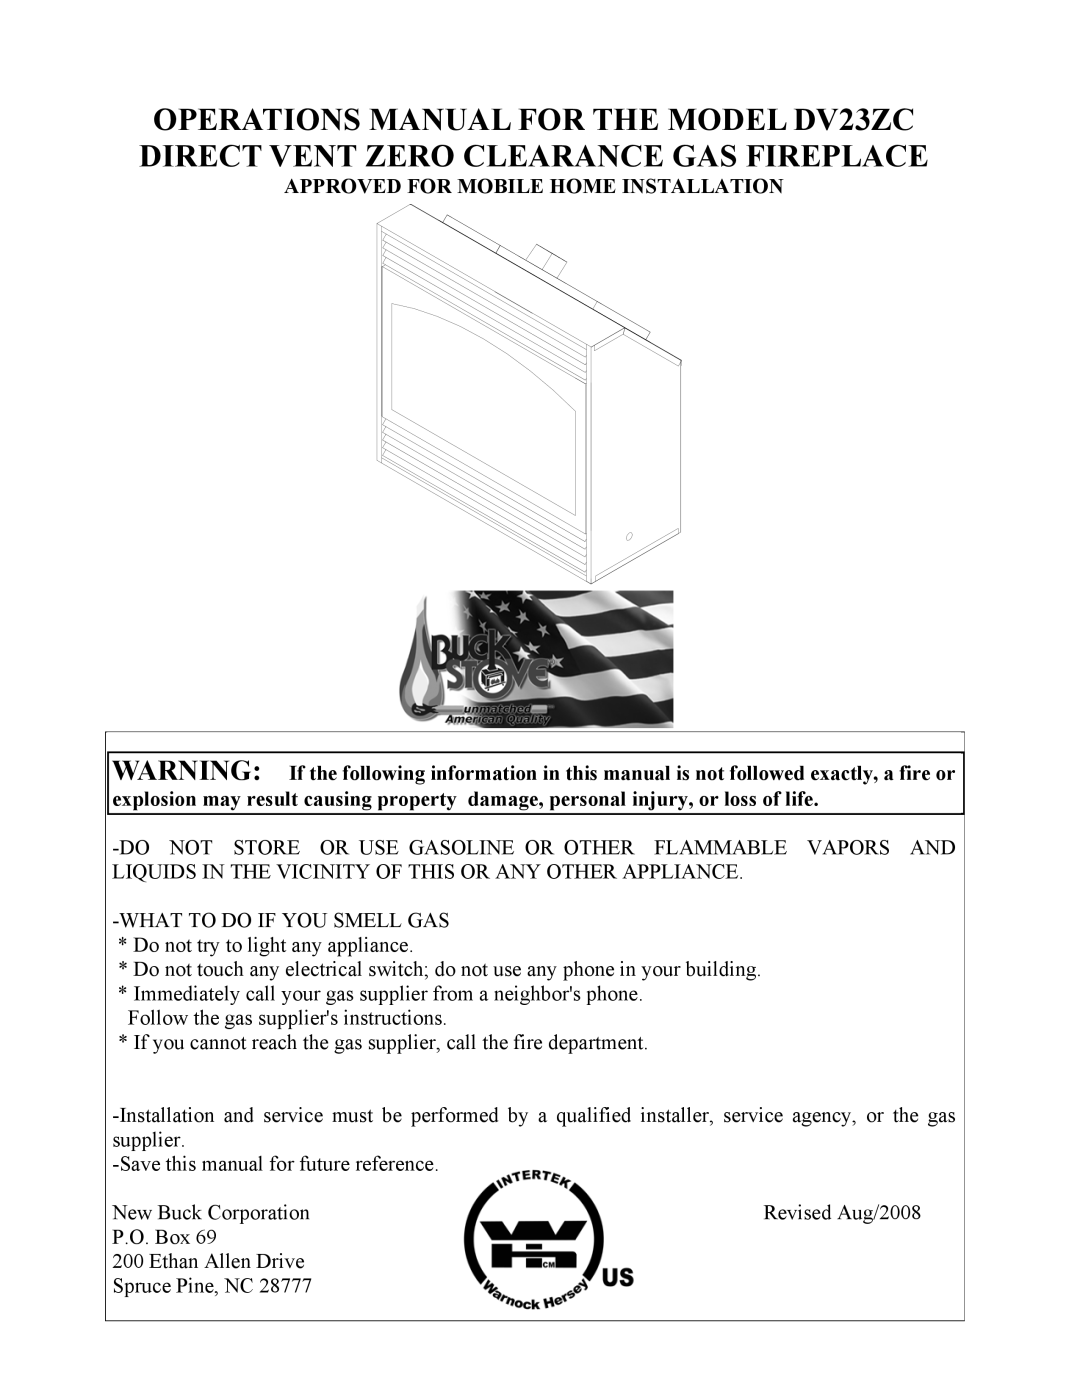 New Buck Corporation DV23ZC manual Approved For Mobile Home Installation 